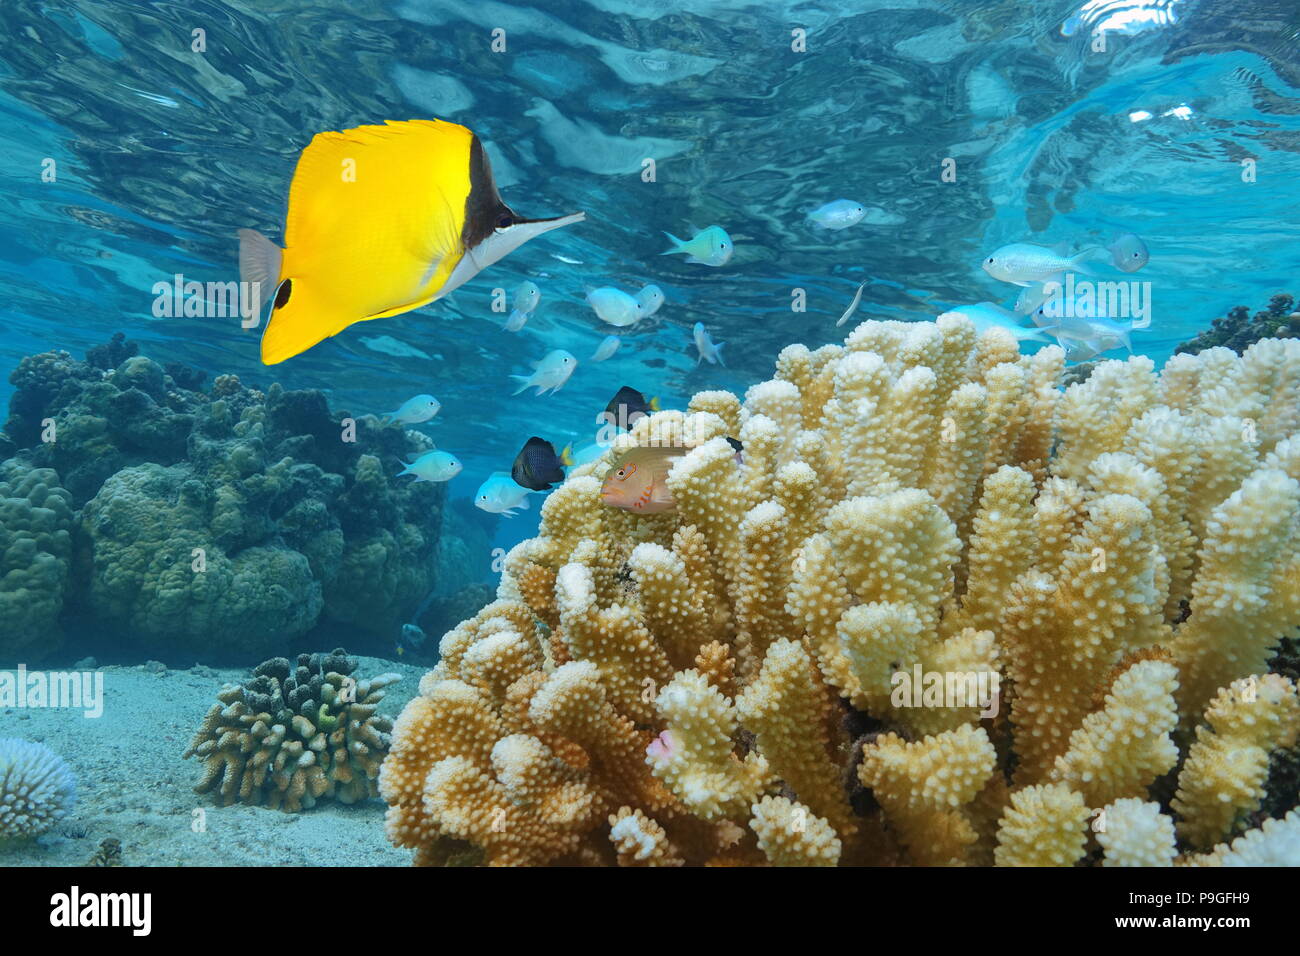 Tropical fishes with cauliflower coral underwater, Pacific ocean, Polynesia, Cook islands Stock Photo